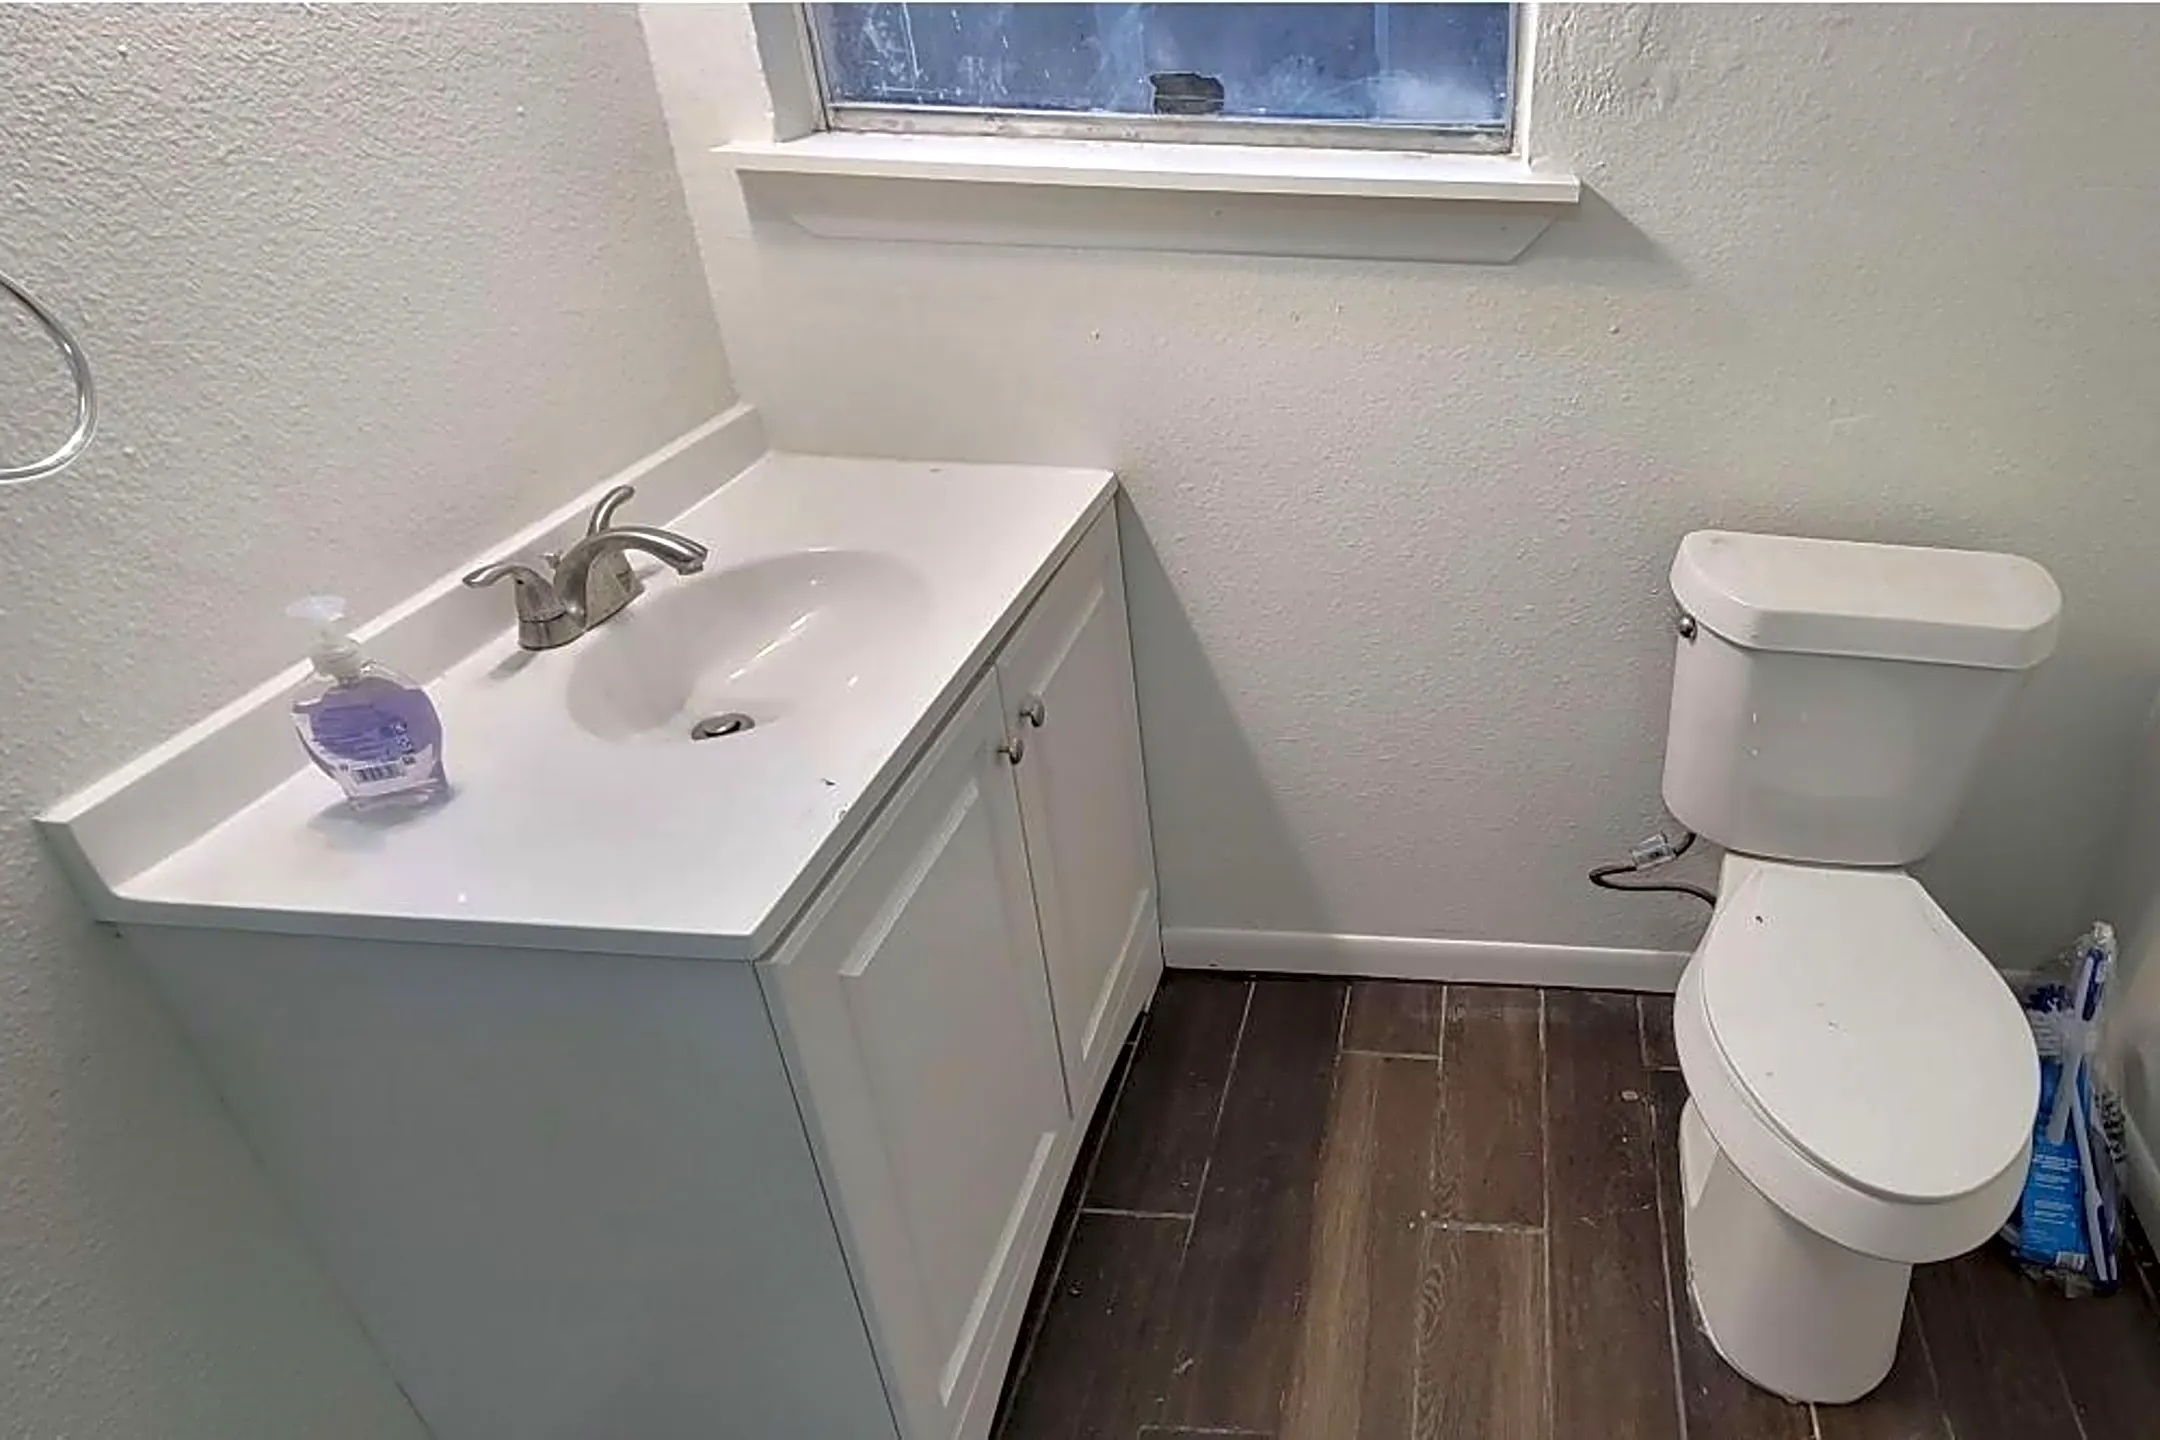 Bathroom - Room For Rent - Fort Worth, TX